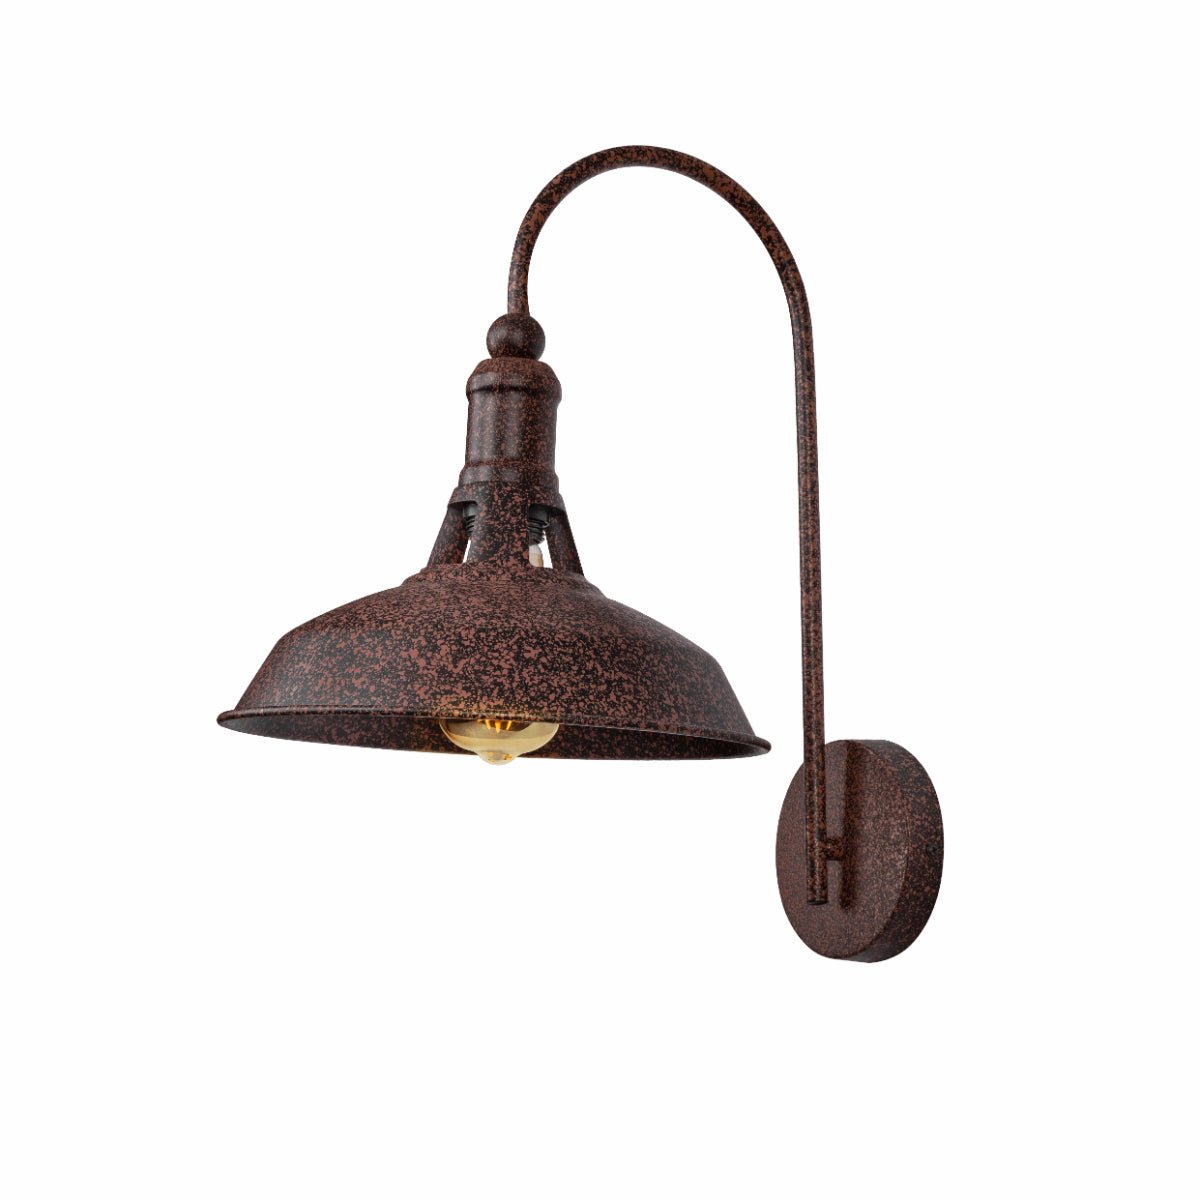 Main image of Rusty Brown Metal Flat Step Downward Industrial Retro Wall Light with E27 Fitting | TEKLED 151-19590